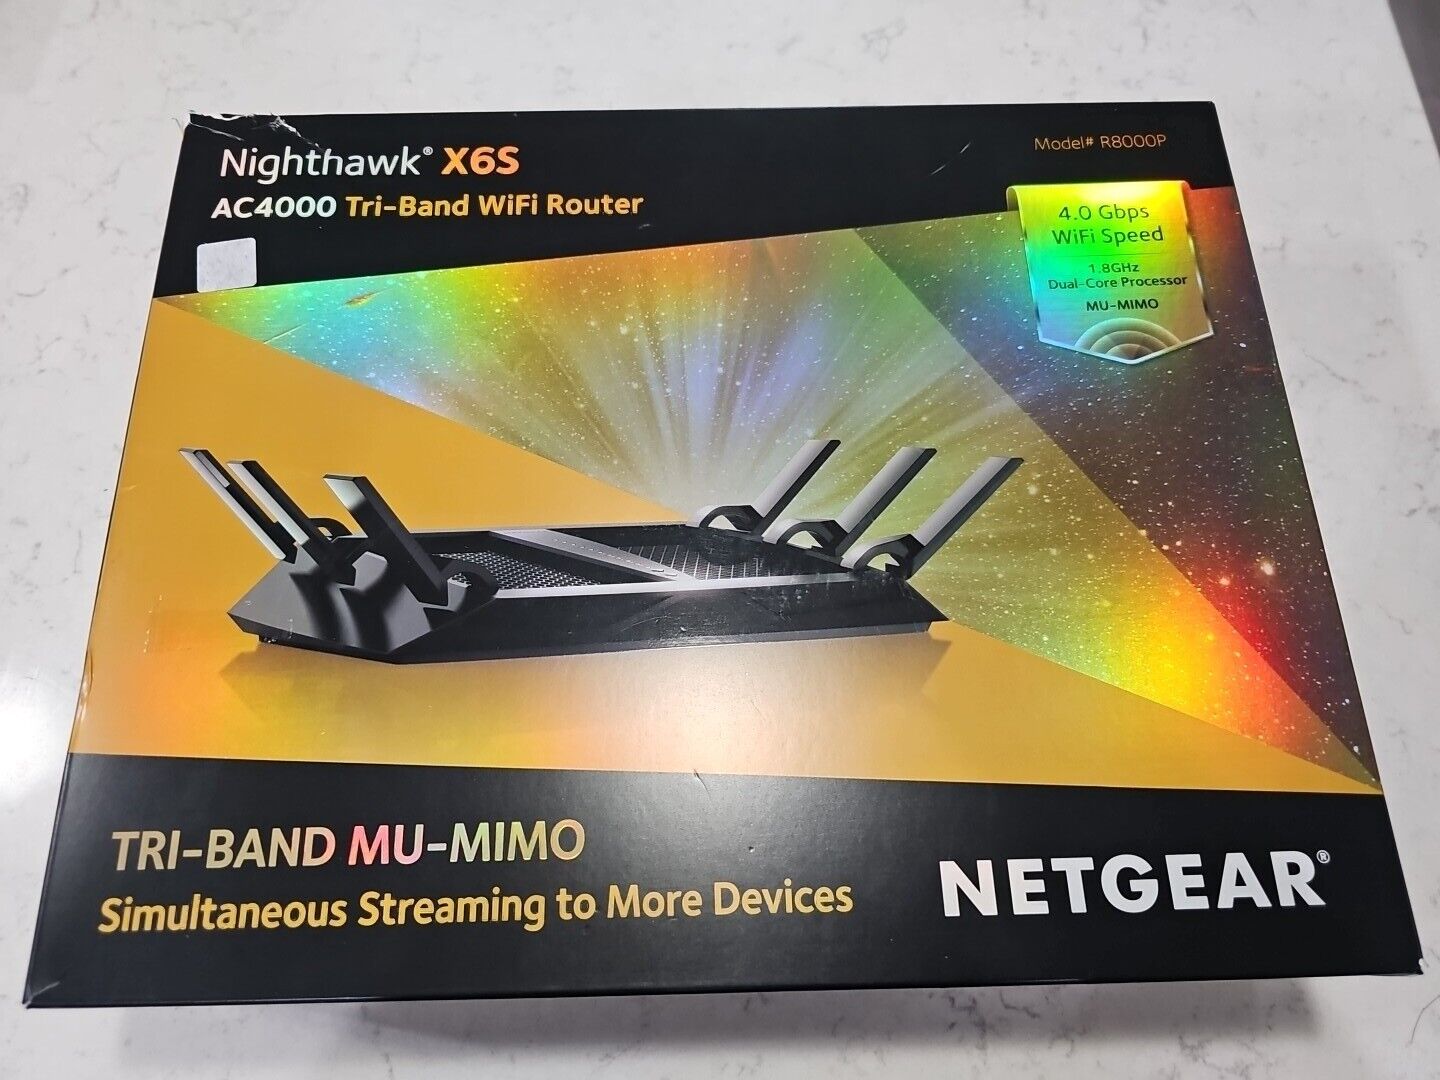 NETGEAR R8000P Nighthawk 1000 Mbps 4 Port Tri-Band WiFi Router Excellent